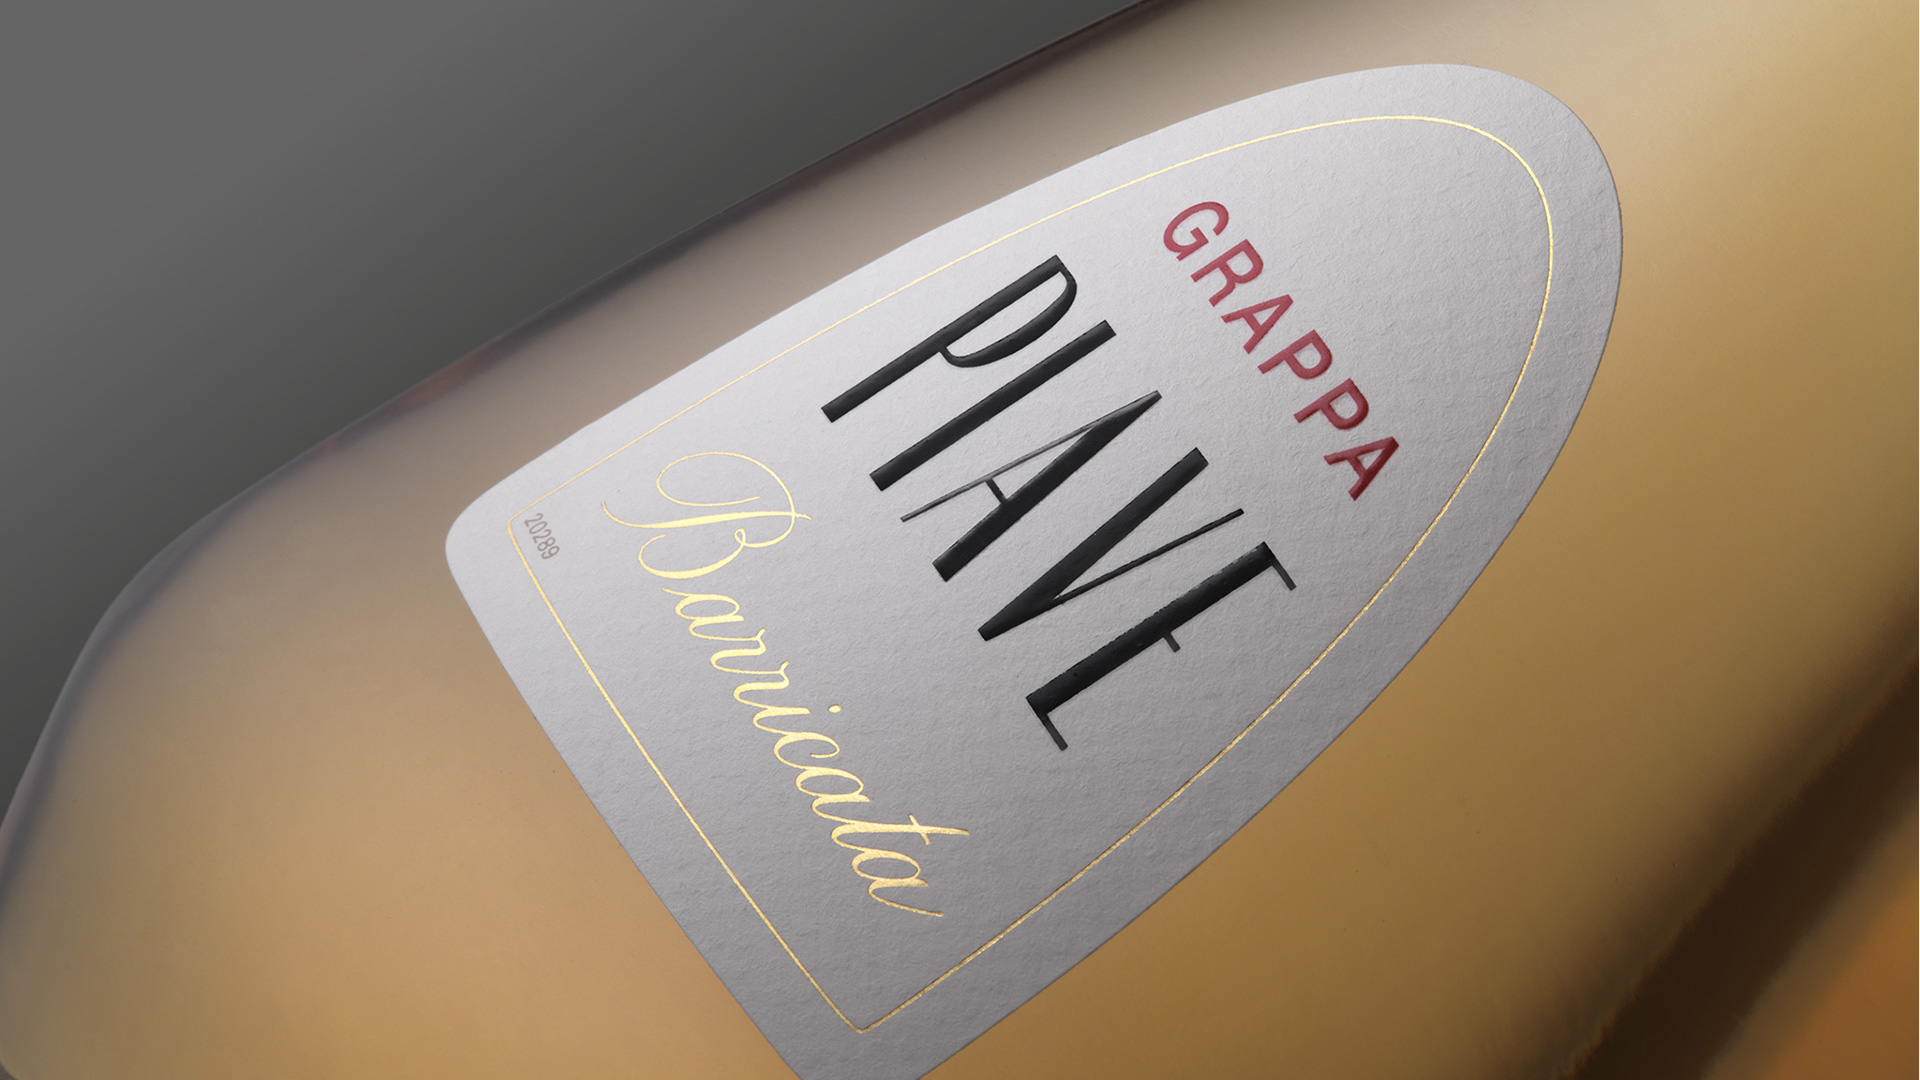 Distillerie Franciacorta Grappa Piave restyling